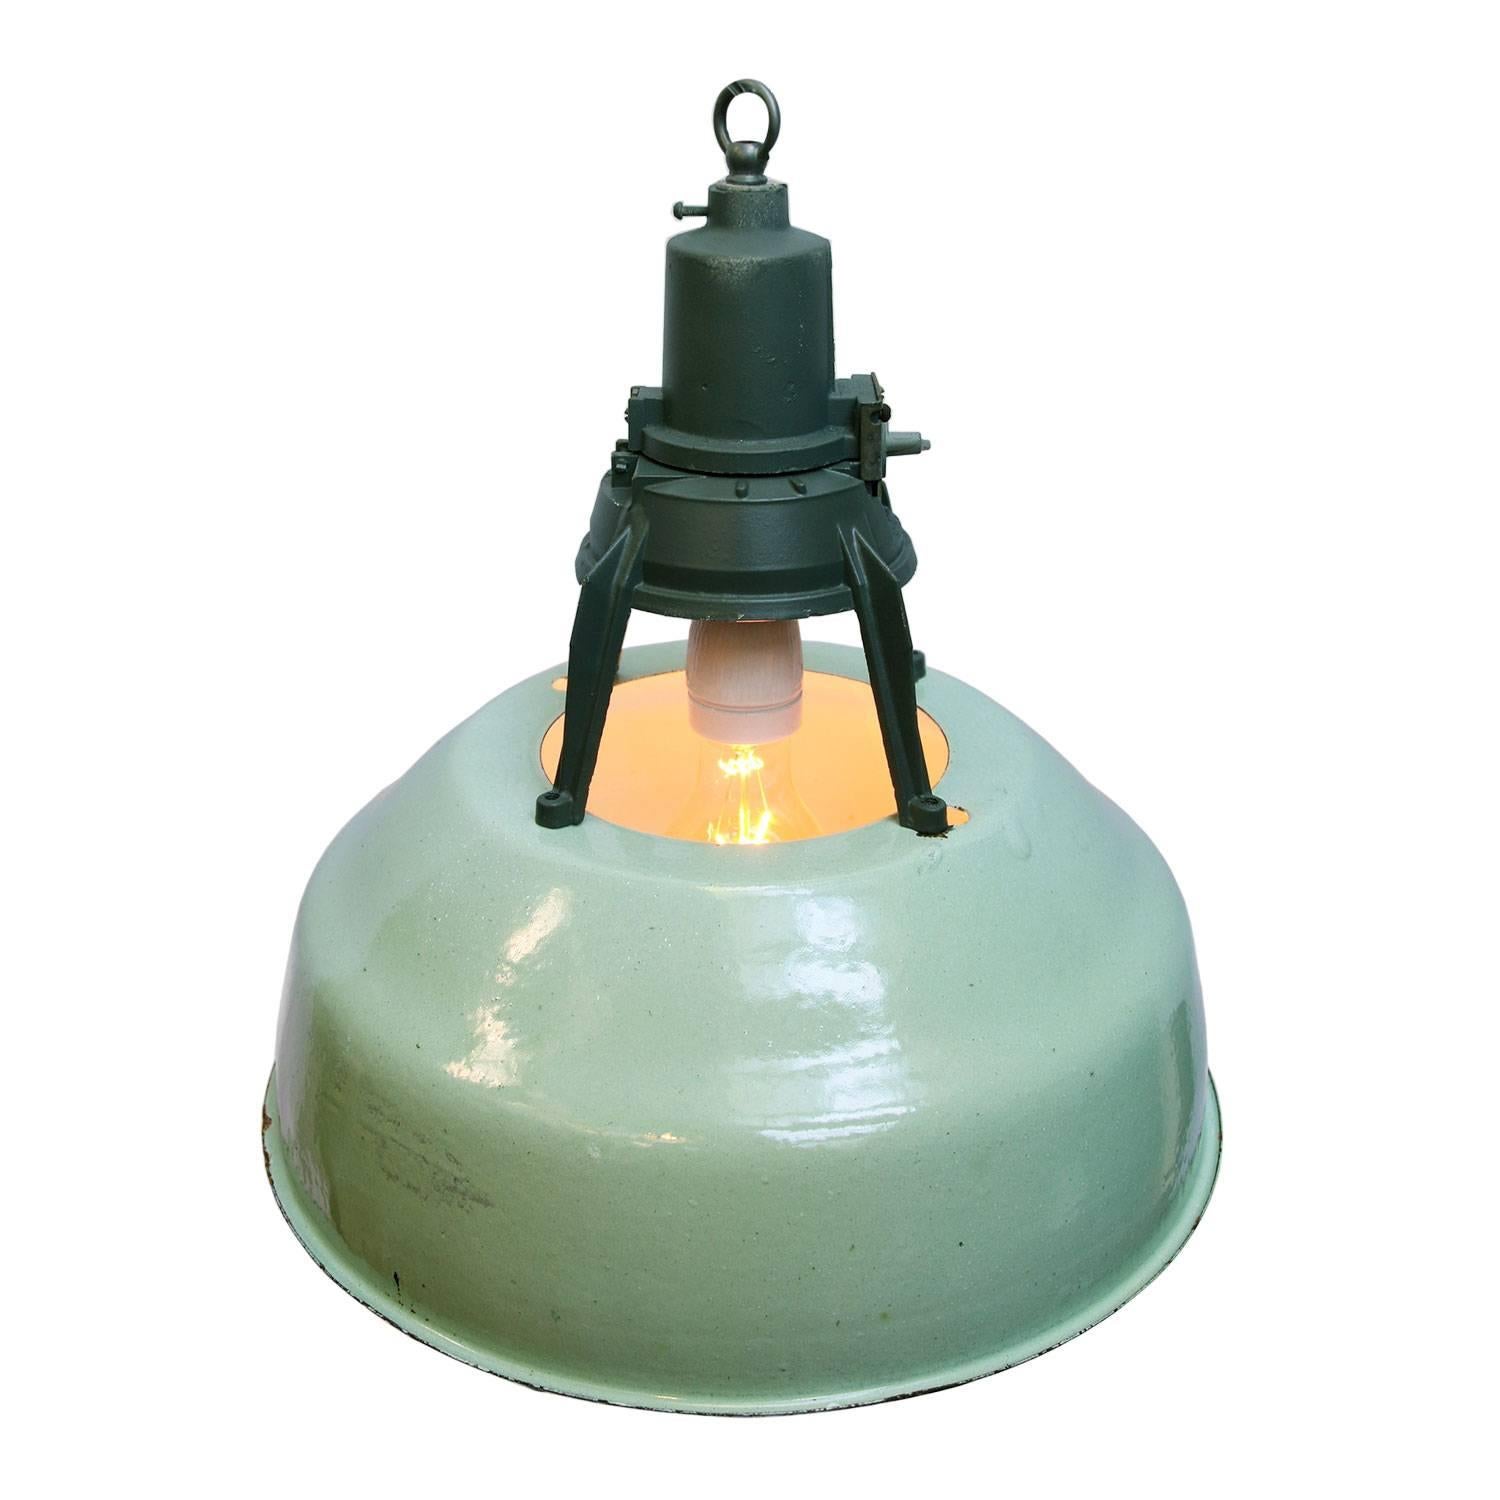 Enamel Industrial pendant. Green enamel shade, white inside.
Dark grey/green cast aluminium top.

weight  2.20 kg / 4.9 lb

Priced per individual item. All lamps have been made suitable by international standards for incandescent light bulbs,